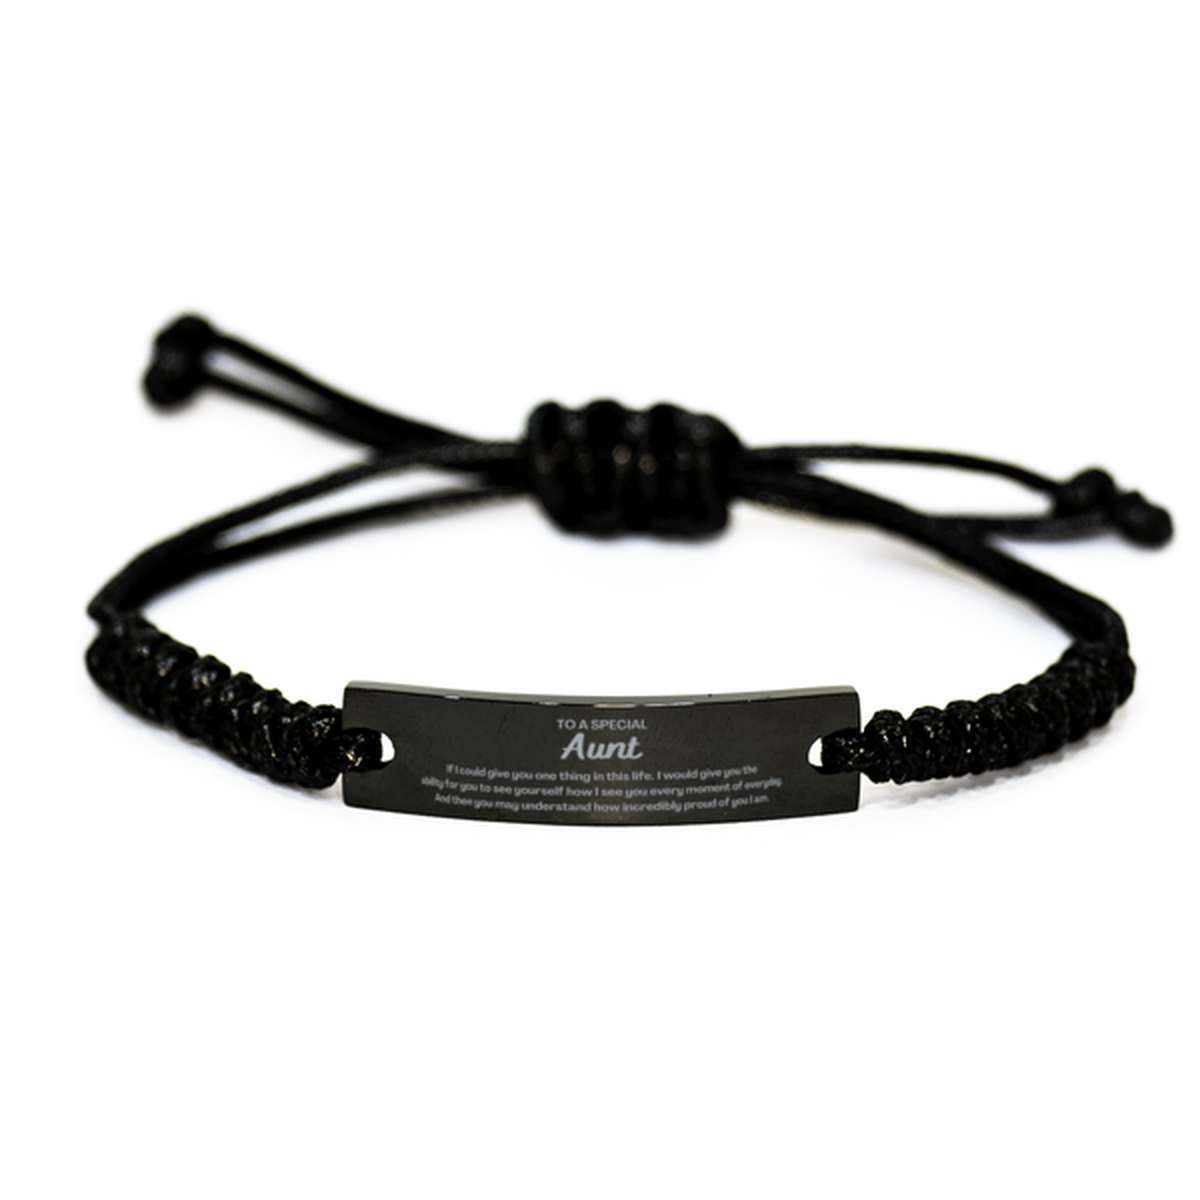 To My Aunt Black Rope Bracelet, Gifts For Aunt Engraved, Inspirational Gifts for Christmas Birthday, Epic Gifts for Aunt To A Special Aunt how incredibly proud of you I am